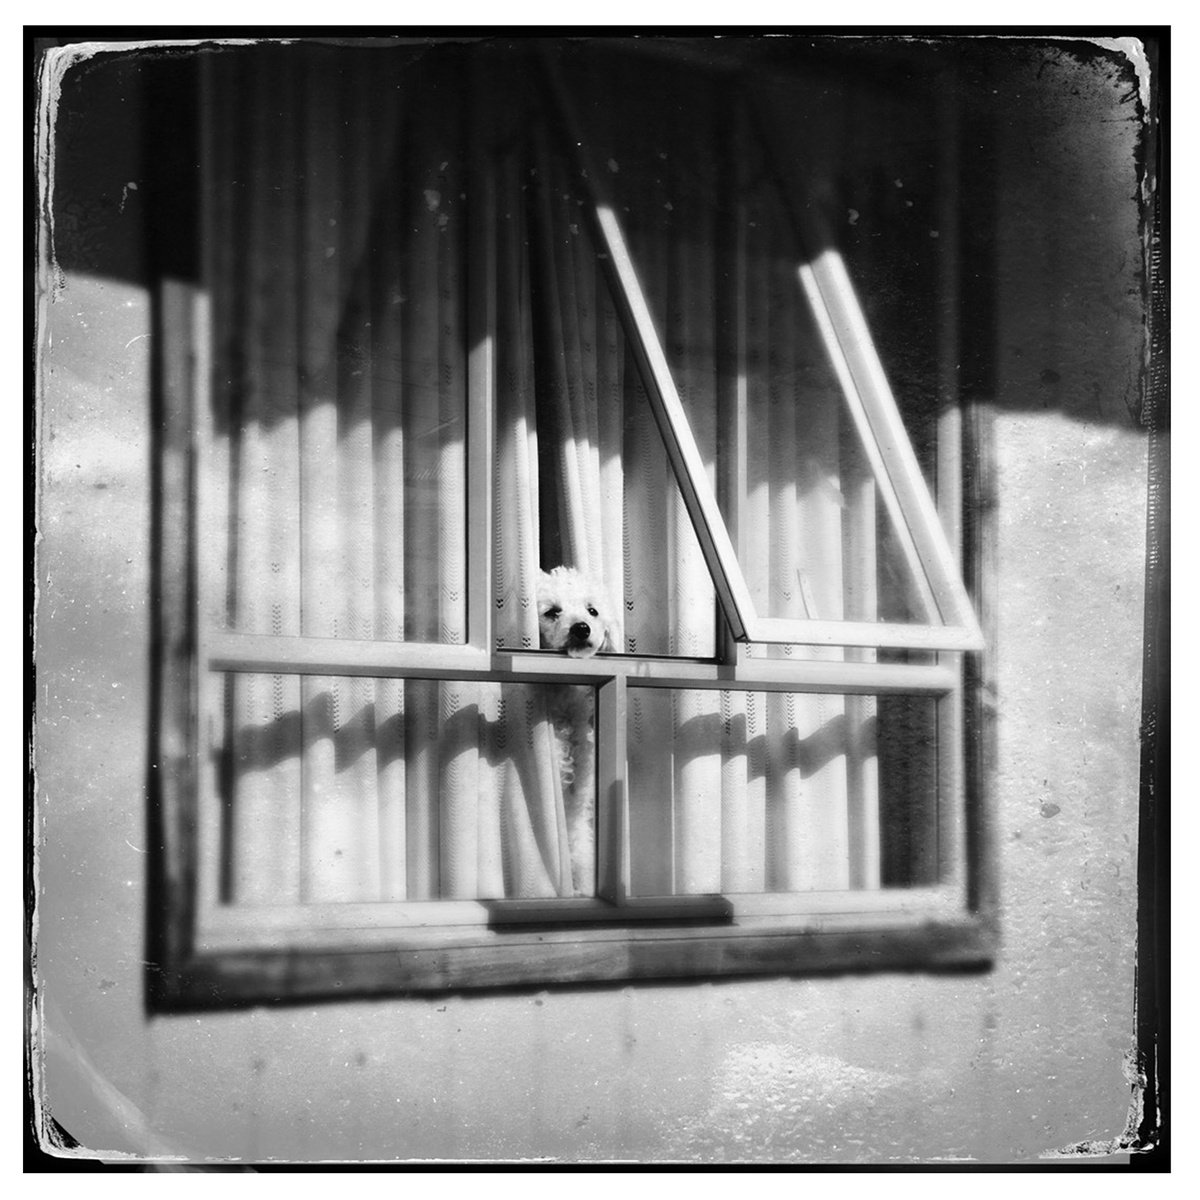 POODLE IN WINDOW, PUERTO NATALES, CHILE 10TH OCTOBER 2015 by Anna Bush